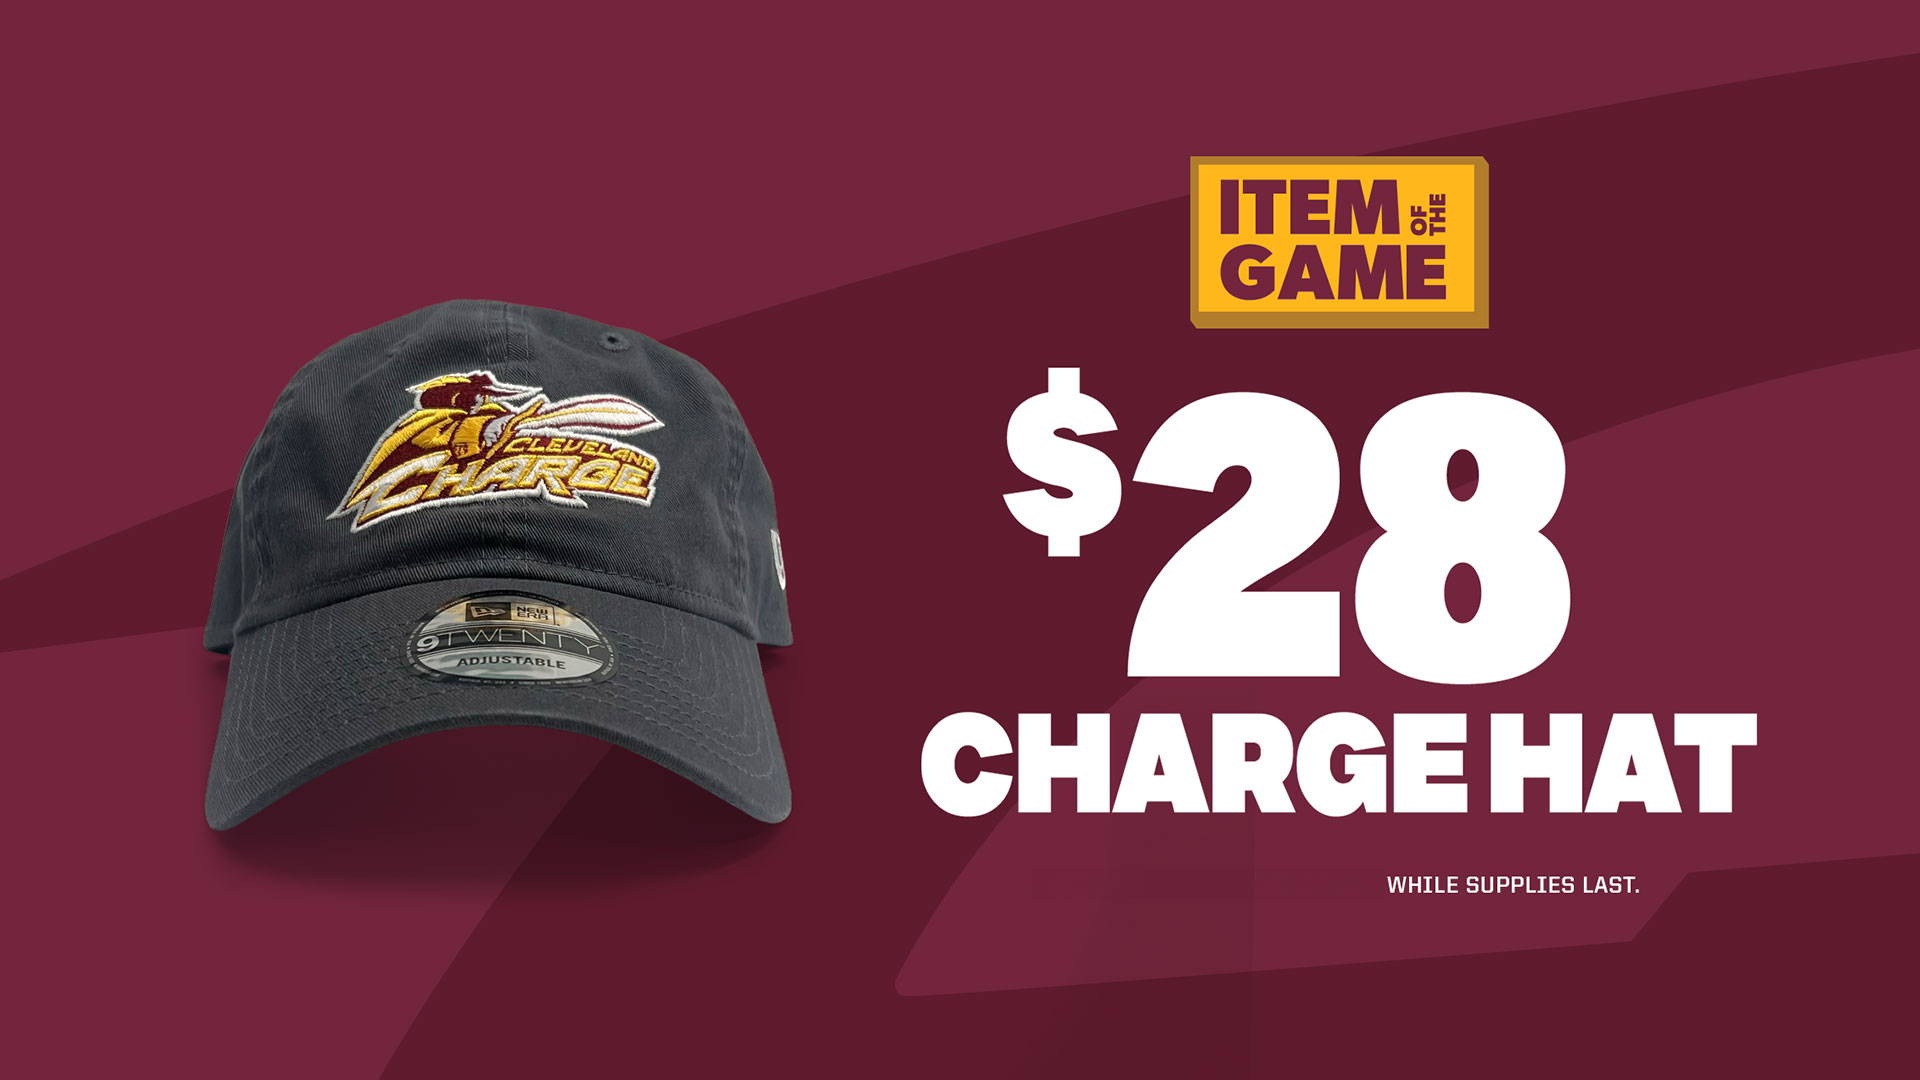 This Cleveland Charge Dad Hat is just $28 for tonight's Item of the Game!